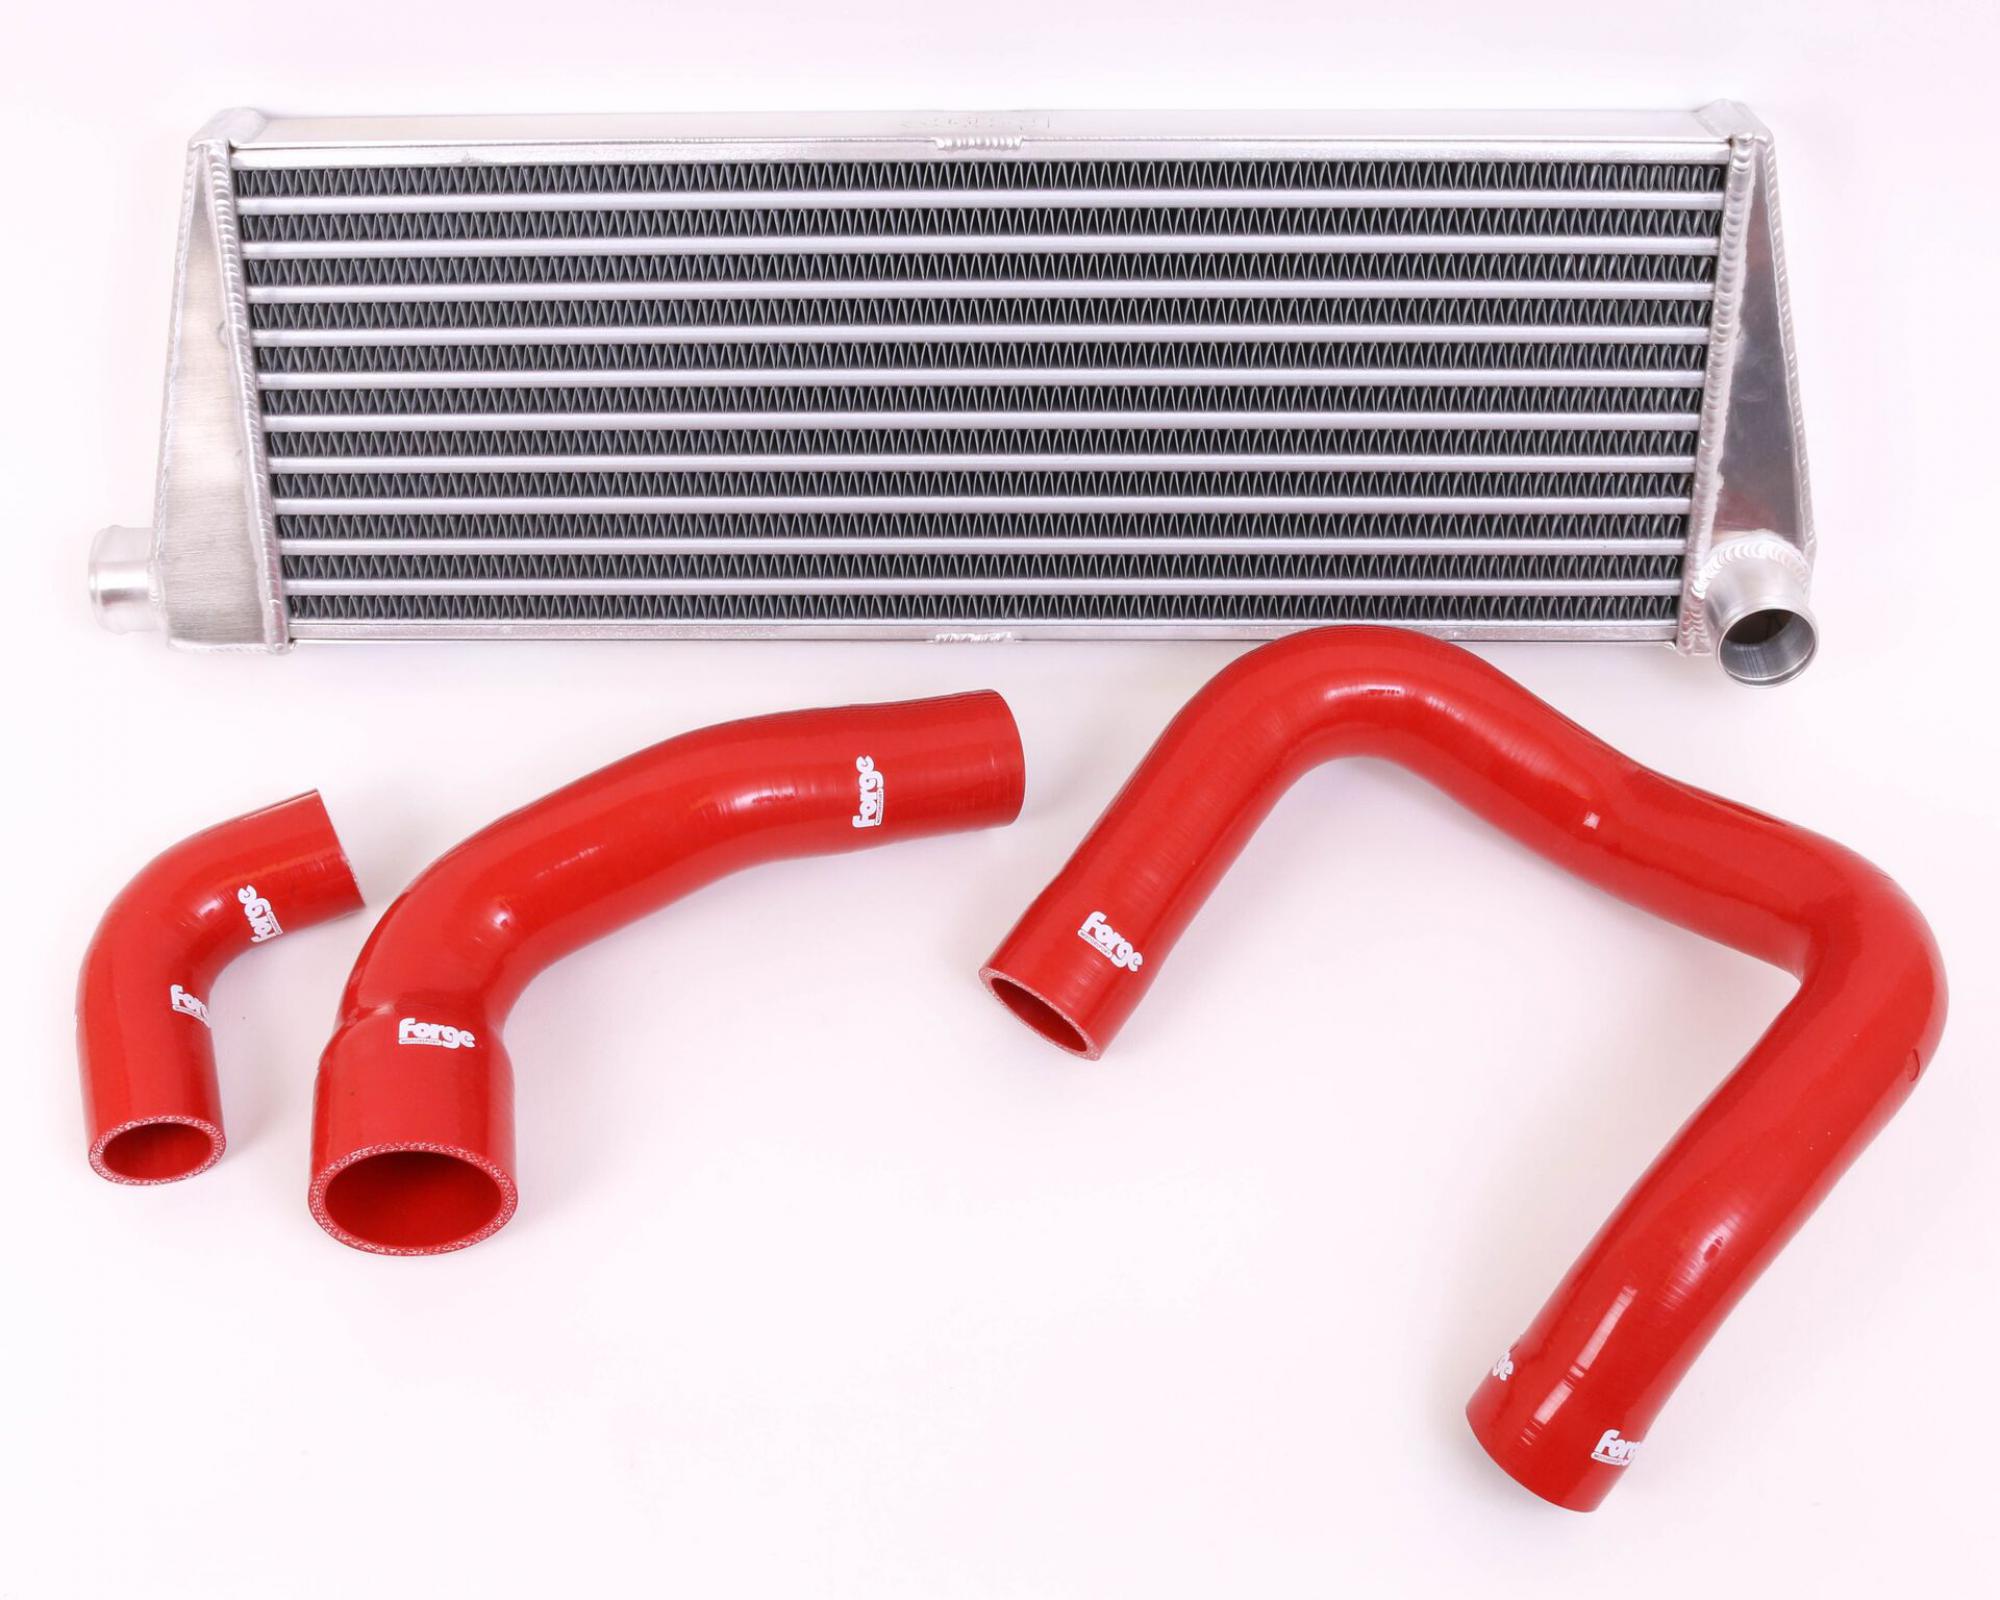 Forge Motorsport Front Mounted Intercooler Kit for the Fiat 500/595/695